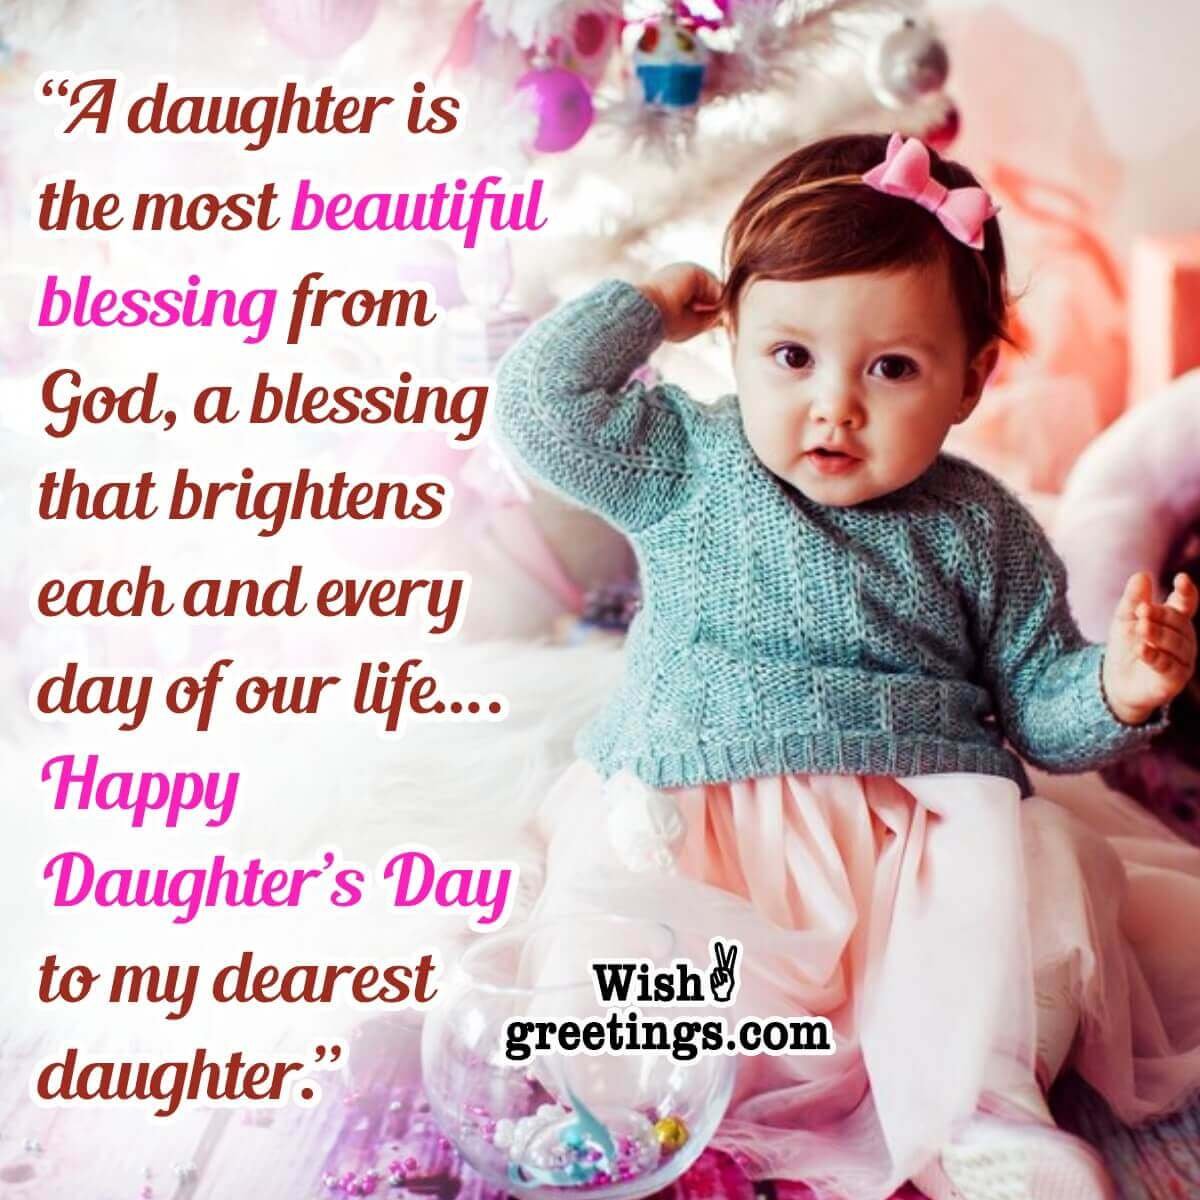 Happy Daughter’s Day To My Dearest Daughter